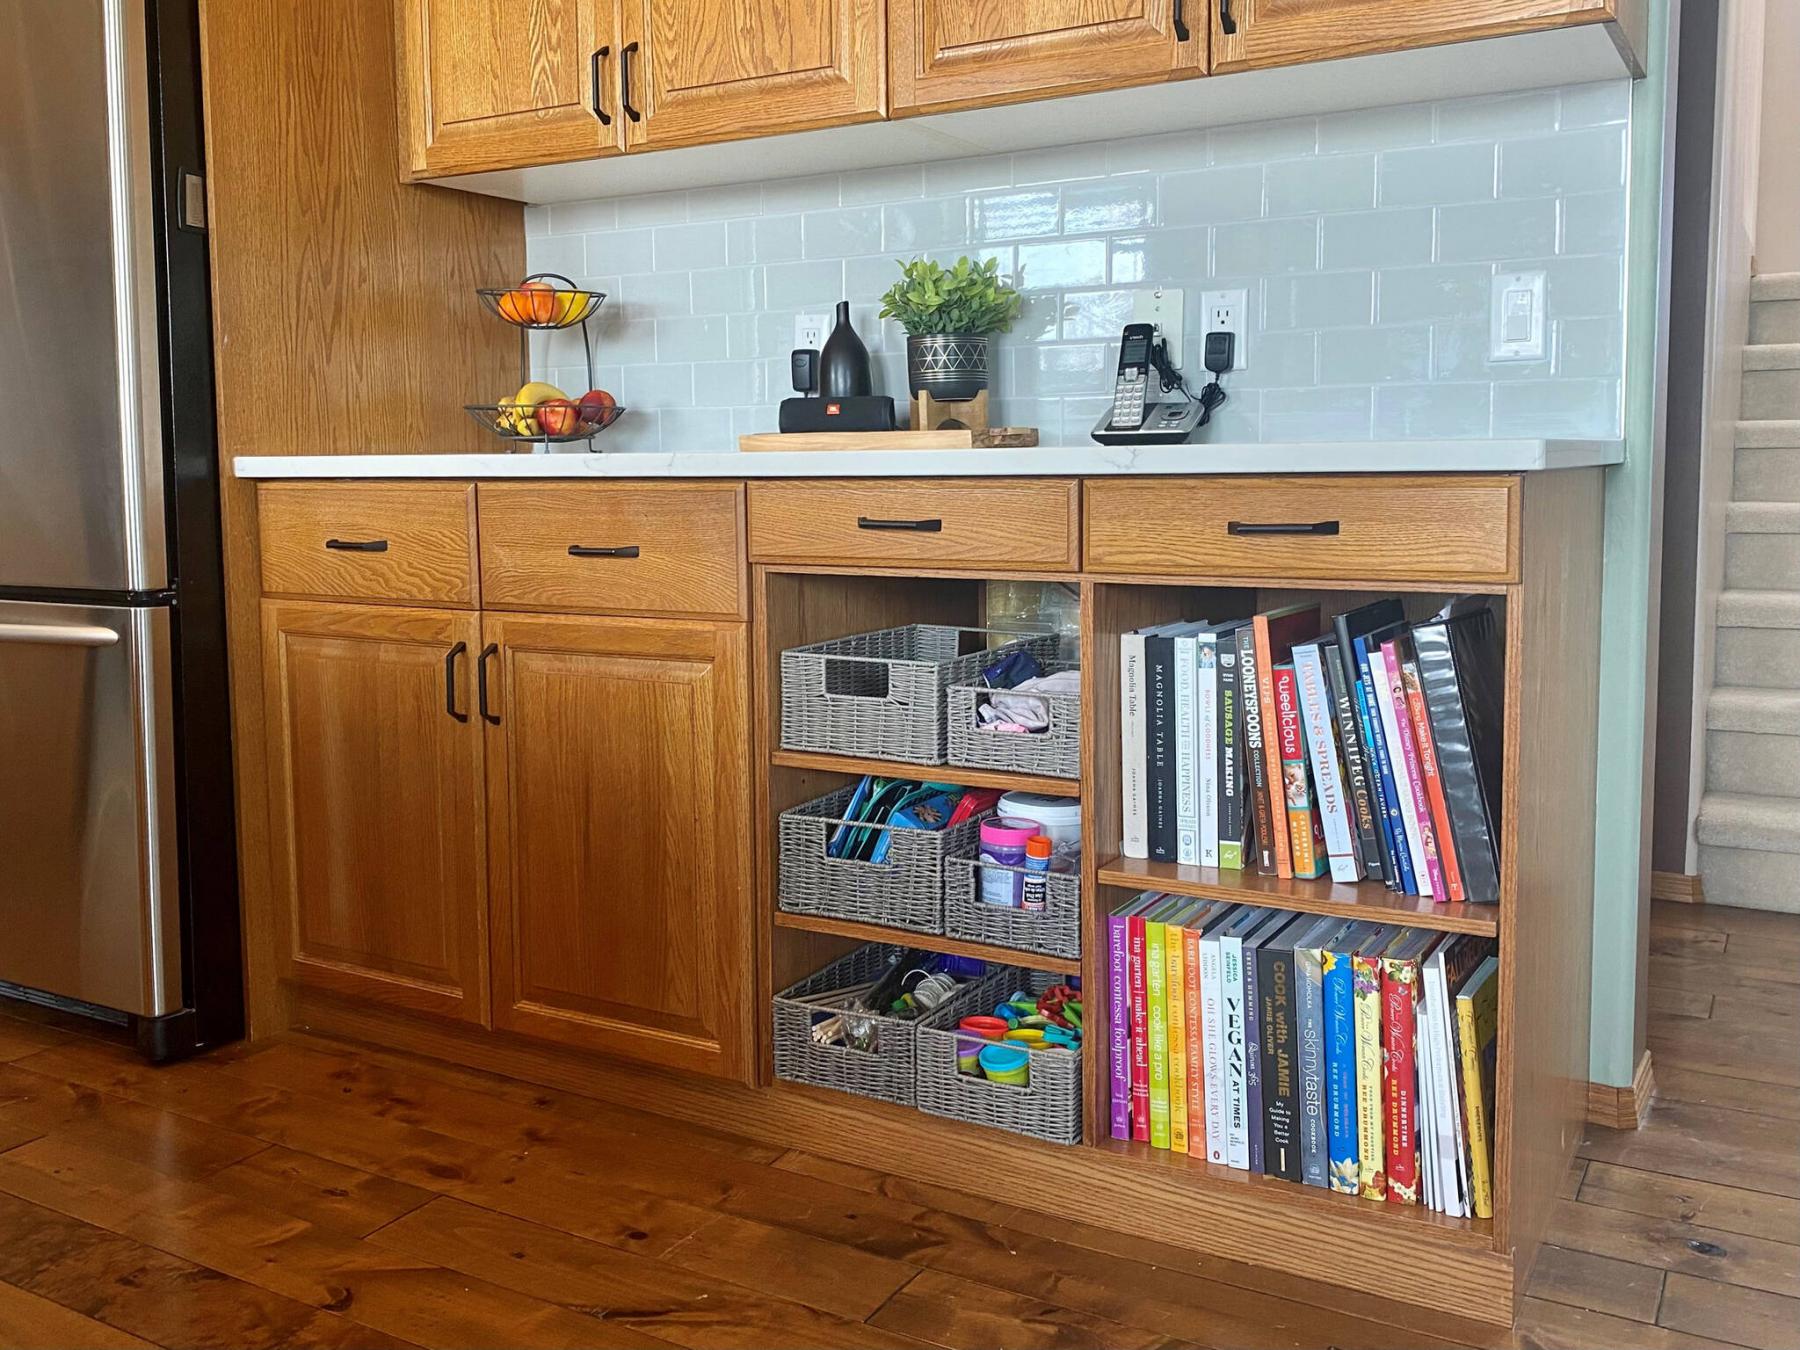 <p>Photos by Marc LaBossiere / Winnipeg Free Press</p><p>The newly fabricated lower cabinet was stained to match the existing doors and shelves.</p>